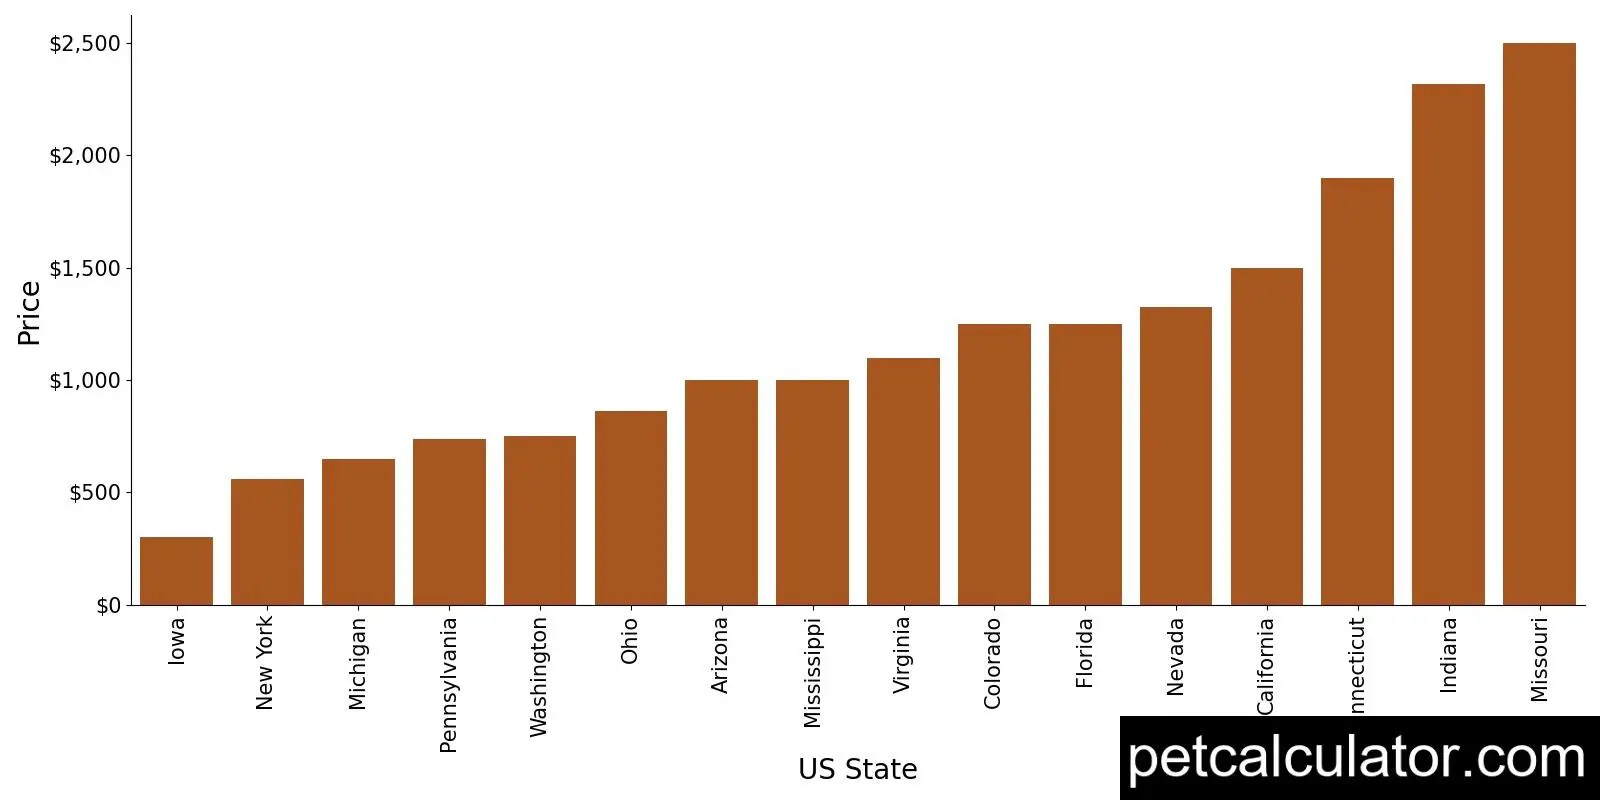 Price of Maremma Sheepdog by US State 